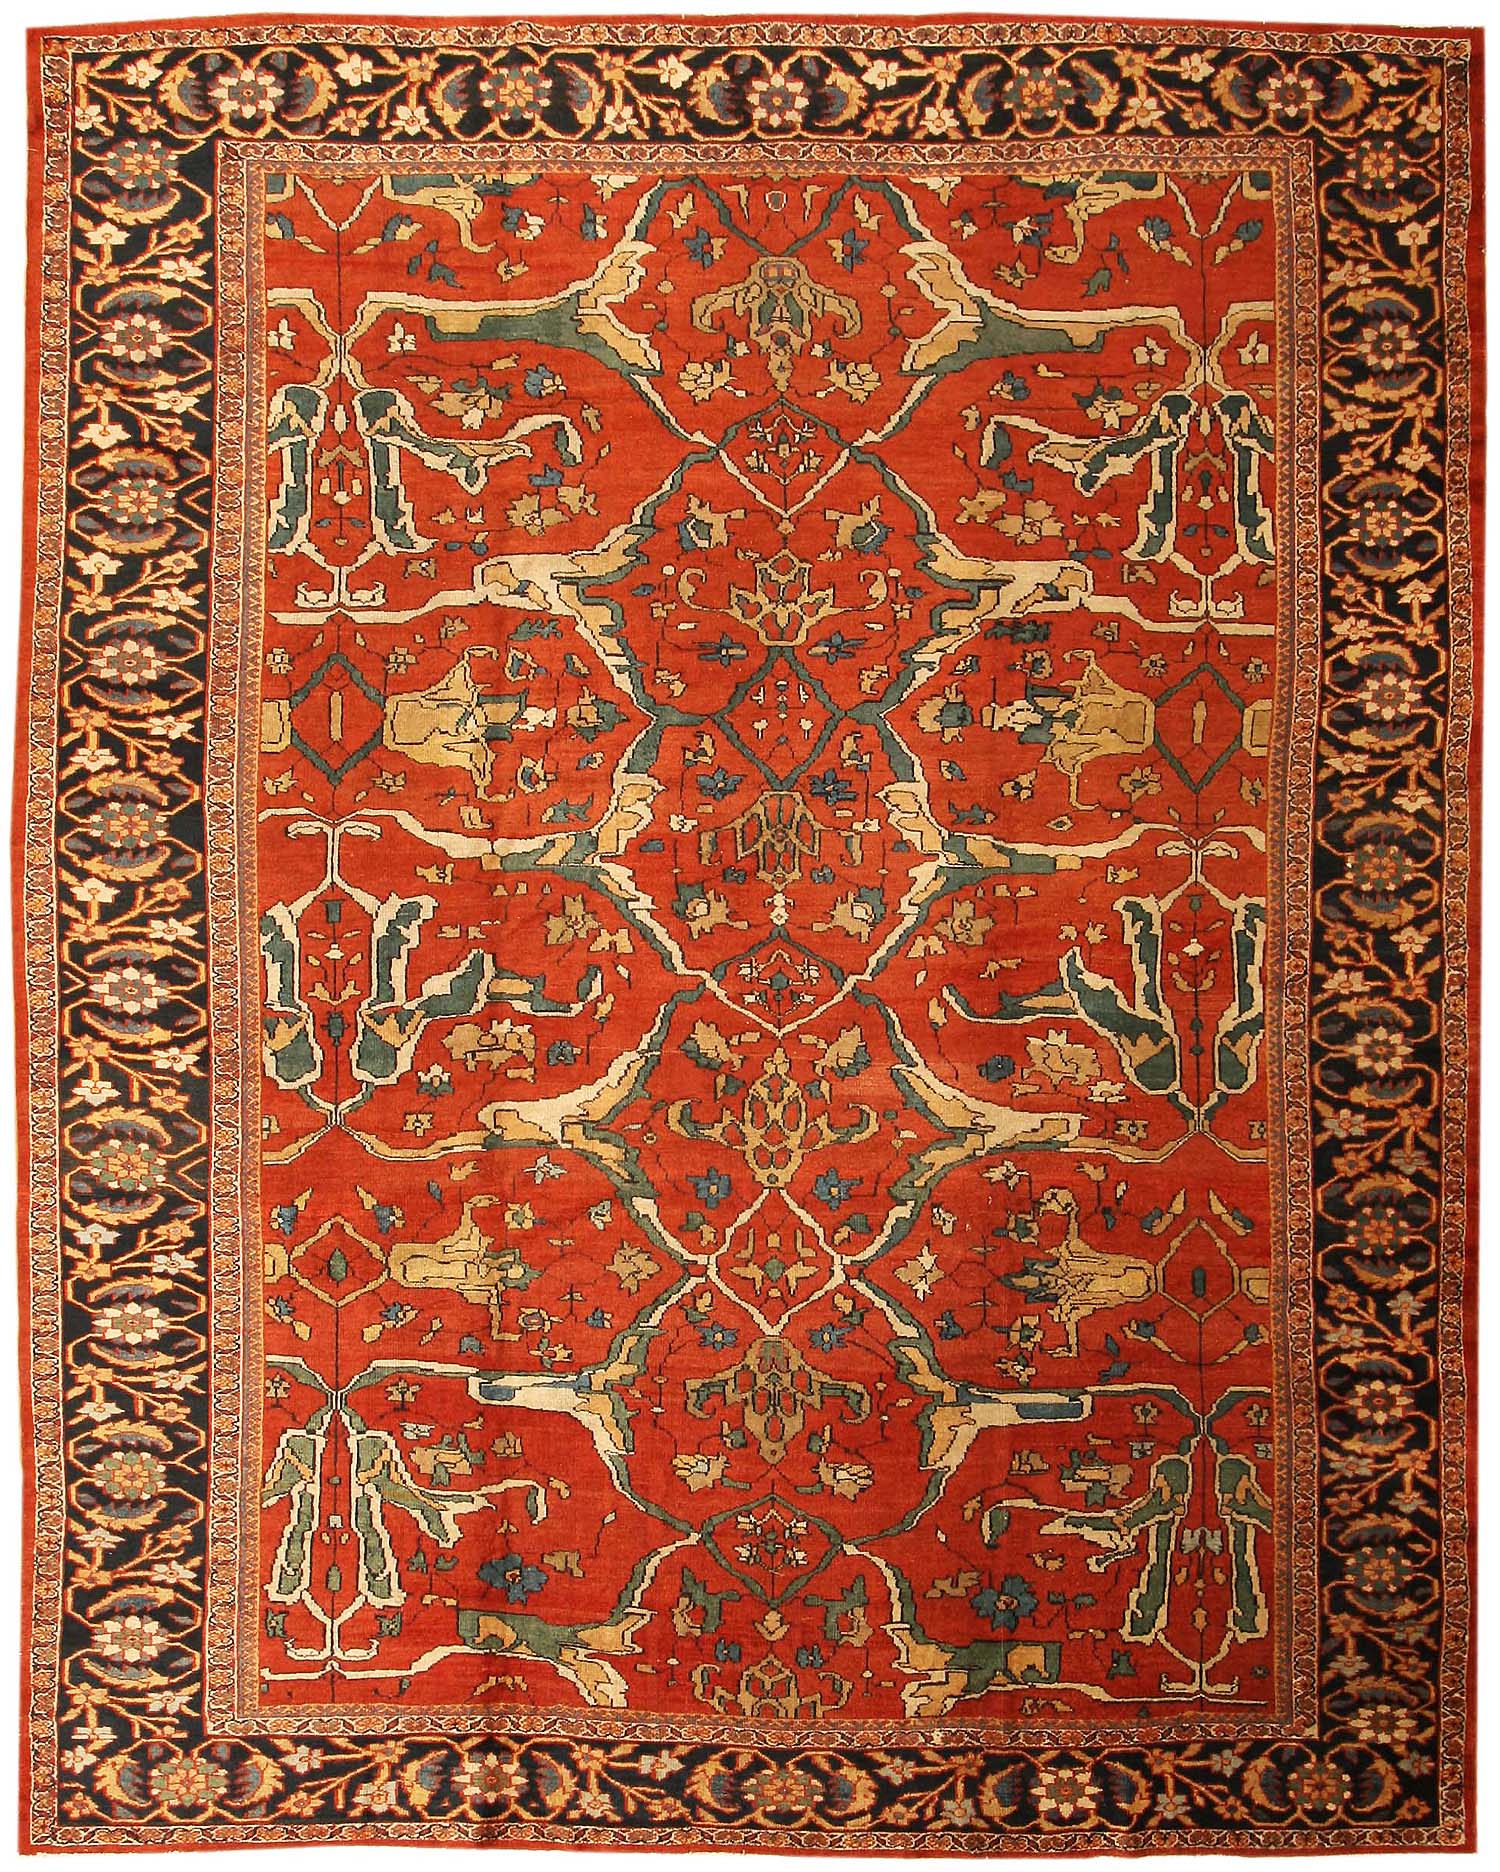 antique rugs sultanabad | antique persian sultanabad rug 43442 nazmiyal rugs SDLATVS